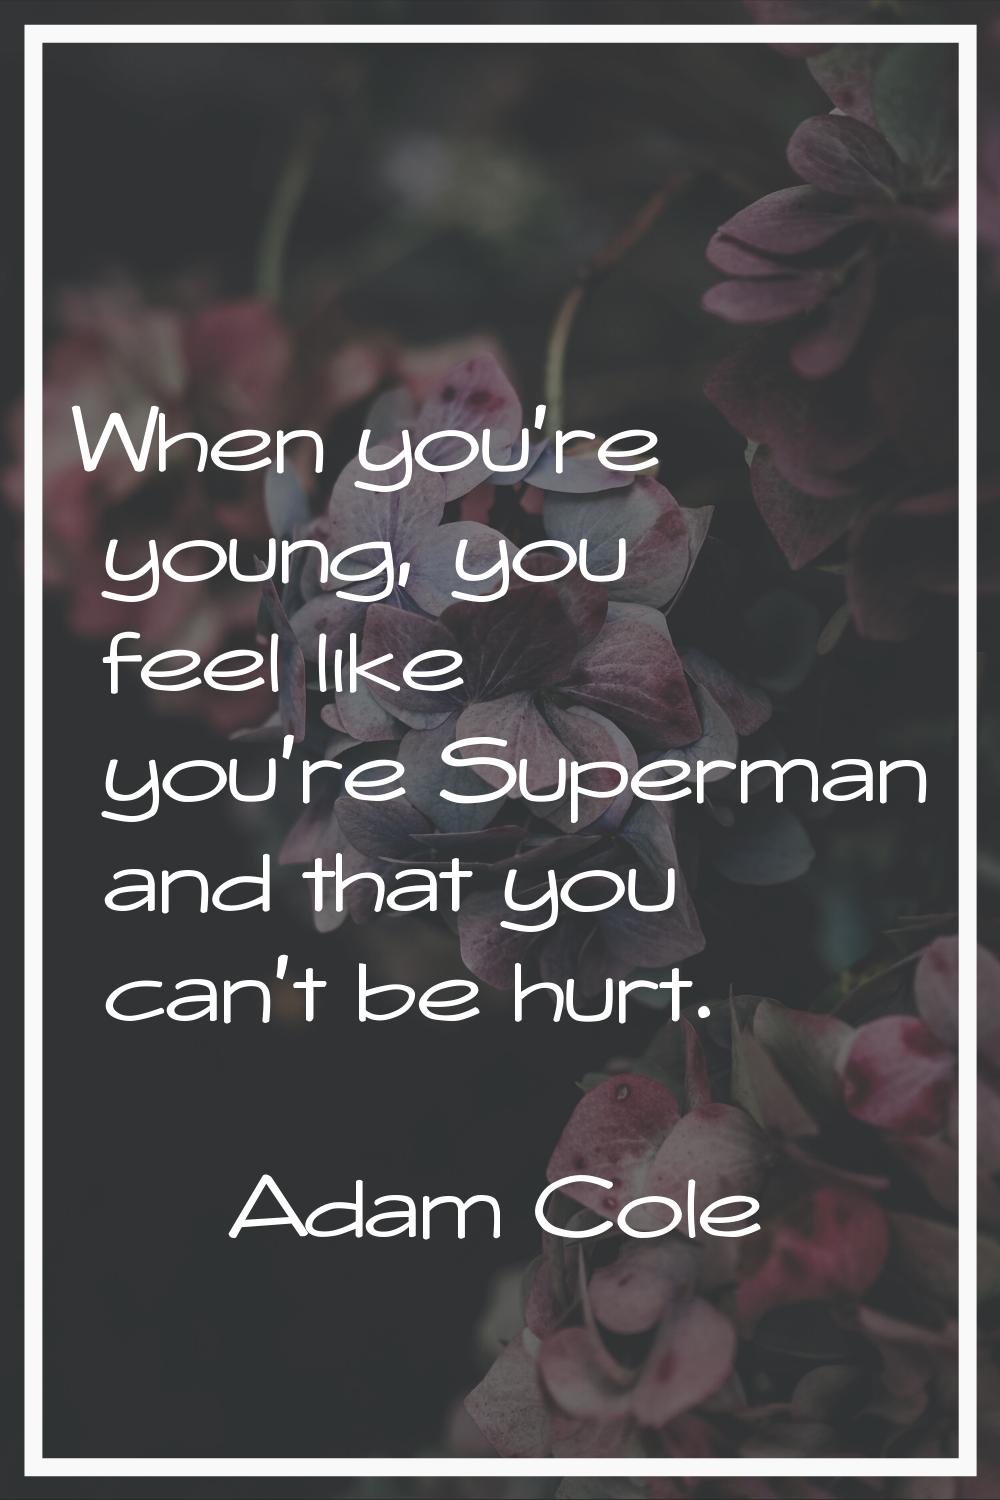 When you're young, you feel like you're Superman and that you can't be hurt.